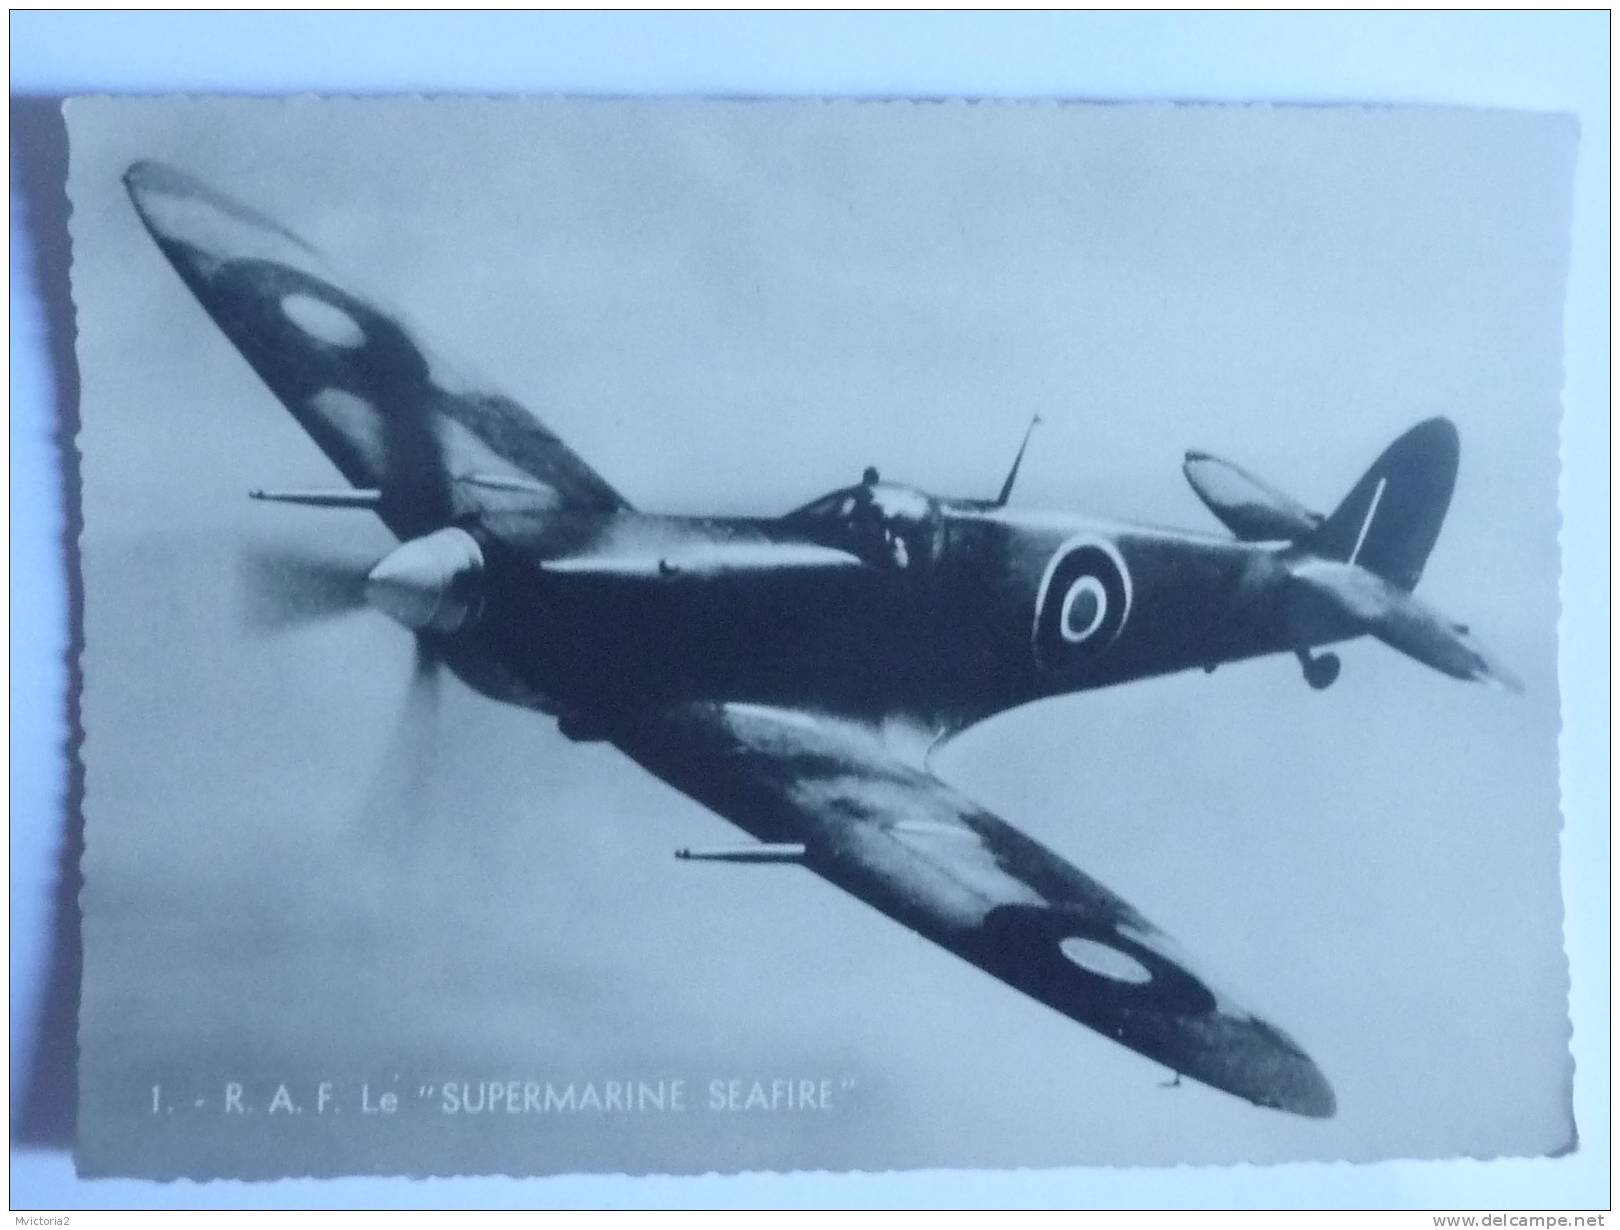 ROYAL AIR FORCE  Le " SUPERMARINE SEAFIRE",Moteur Rolls Royces, 2 Canons, 4 Mitrailleuses. - 1939-1945: 2nd War